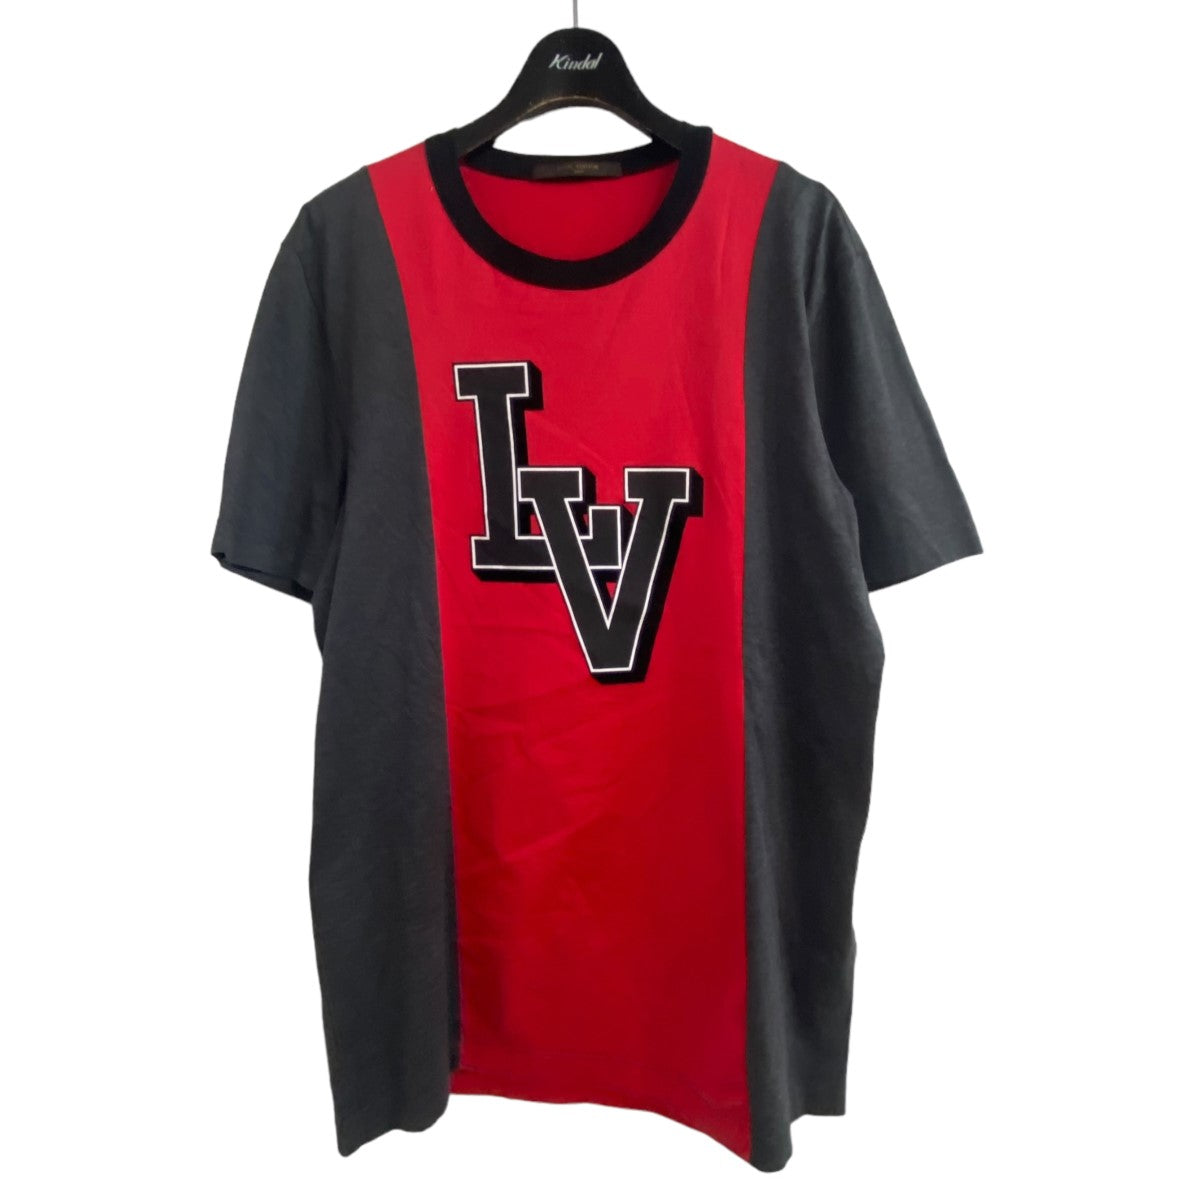 LOUIS VUITTON(ルイヴィトン) プリントバイカラーTシャツ HDY07W ...